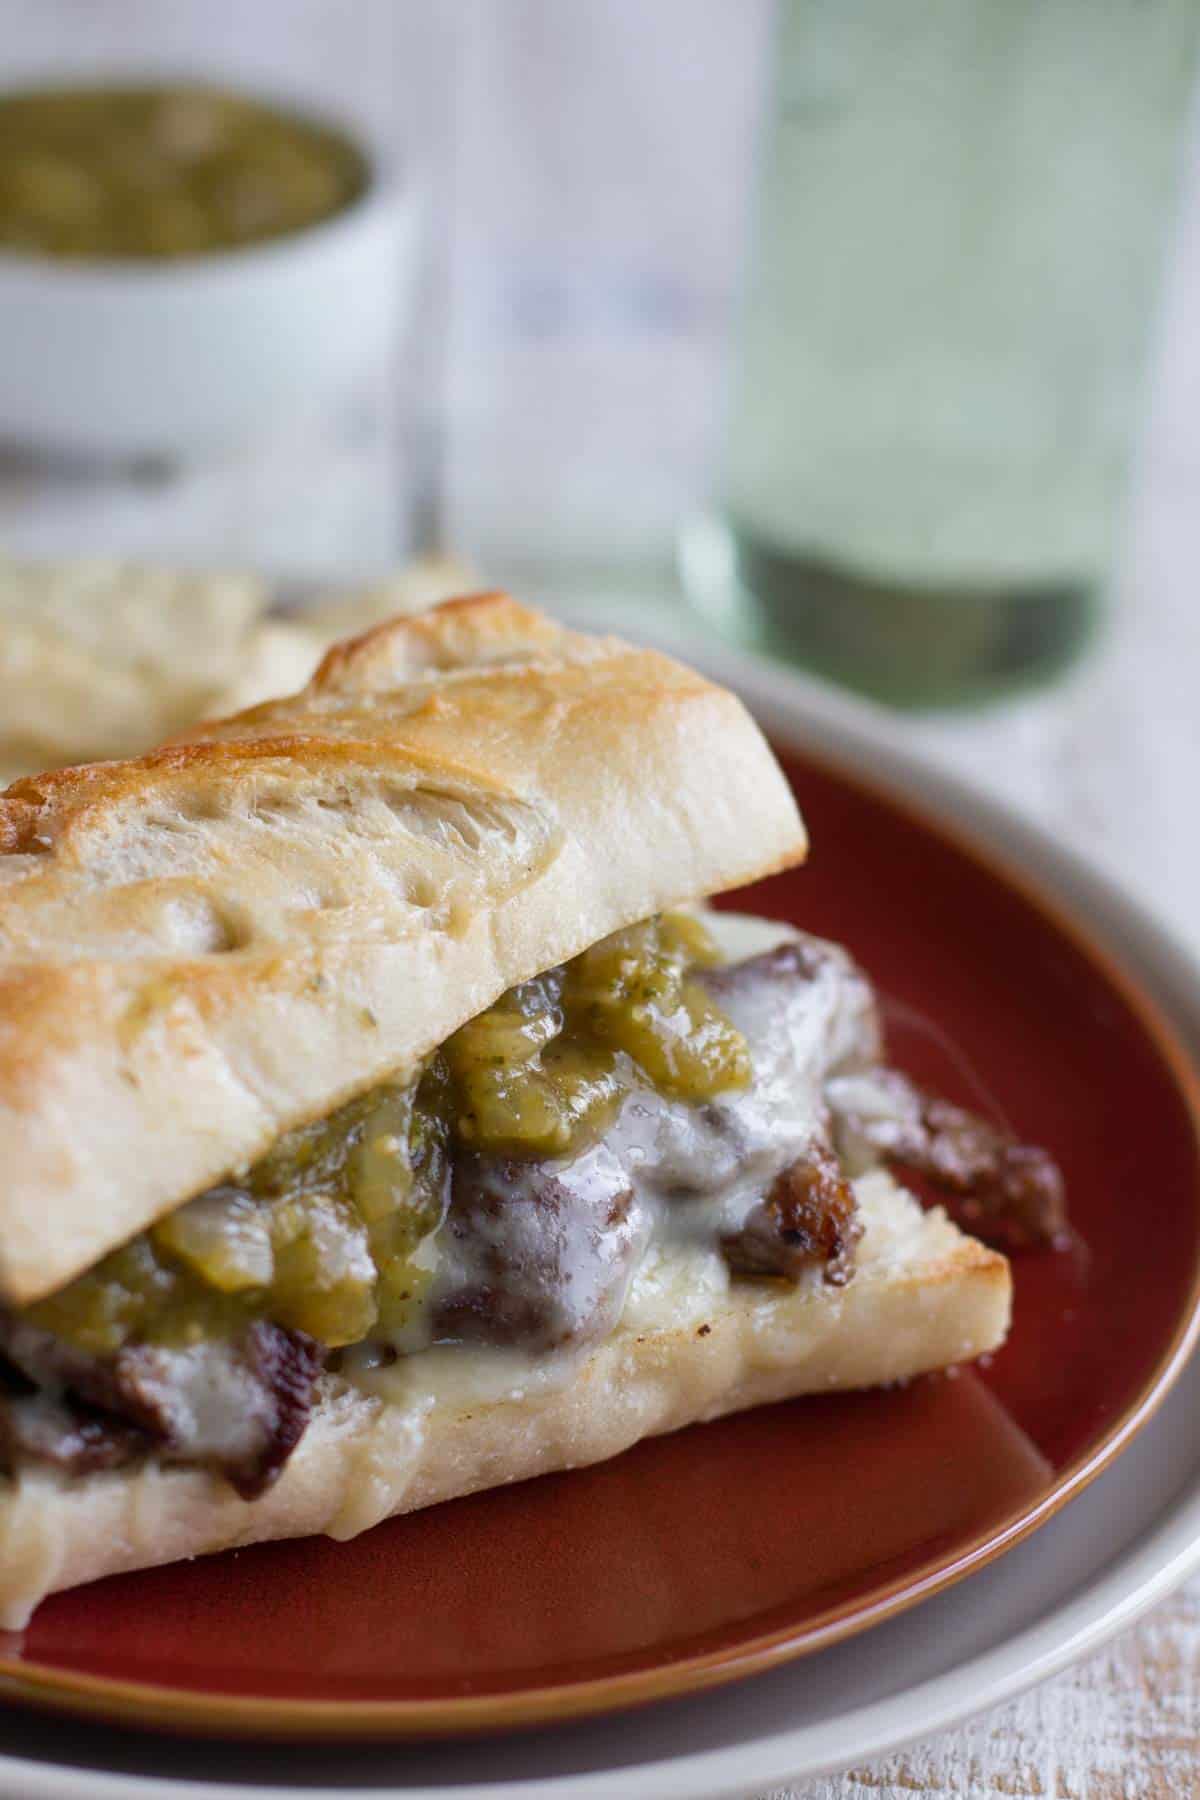 Sandwich topped with steak, melted cheese, and salsa verde.